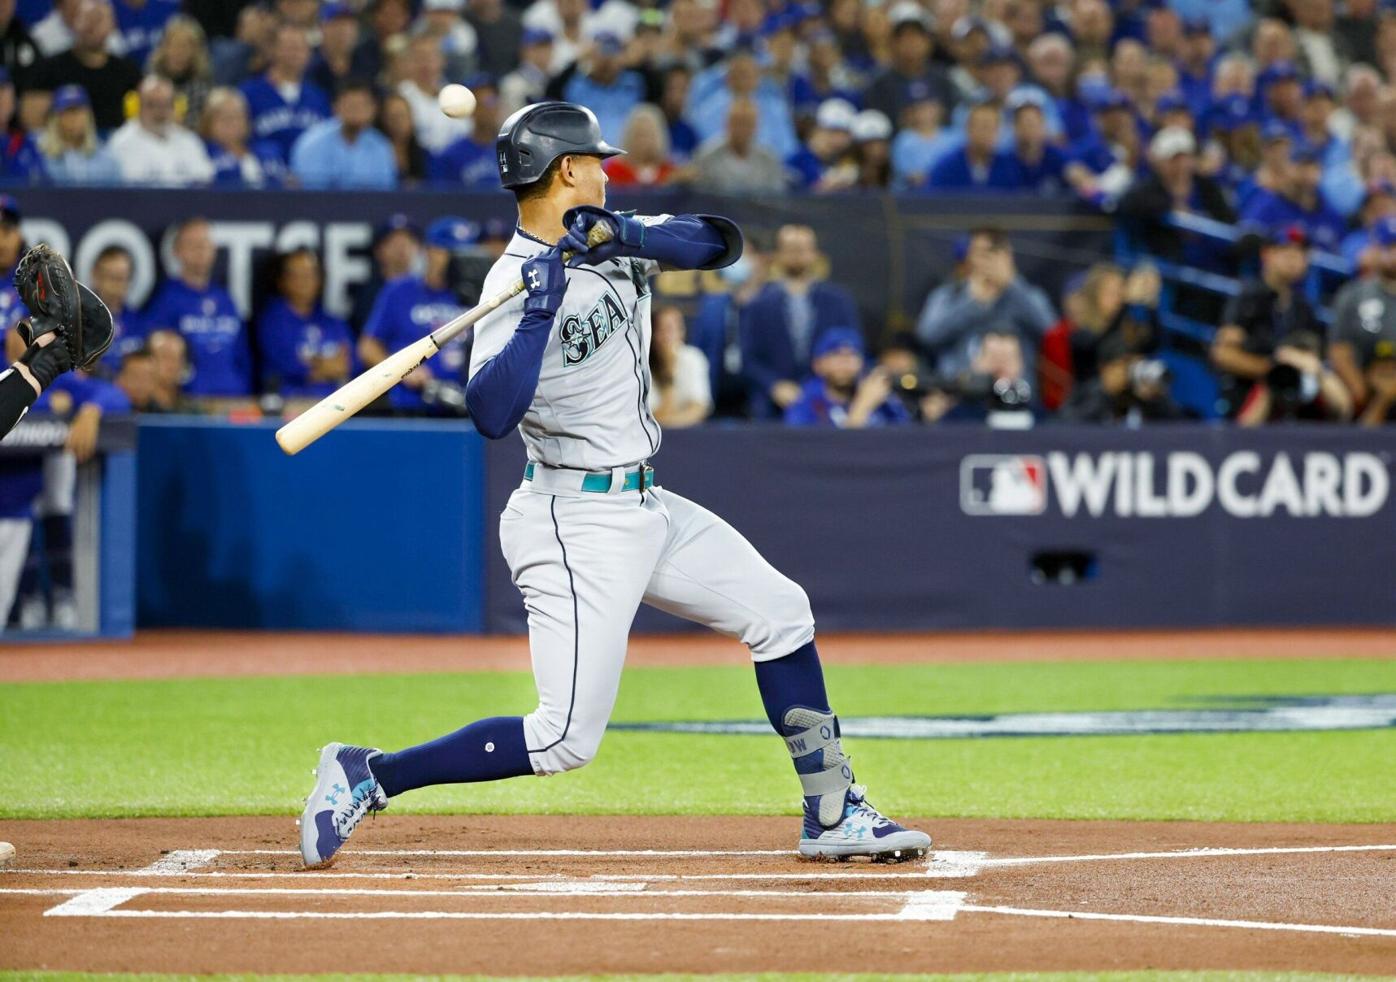 Blue Jays' George Springer leaves Game 2 vs. Mariners after scary